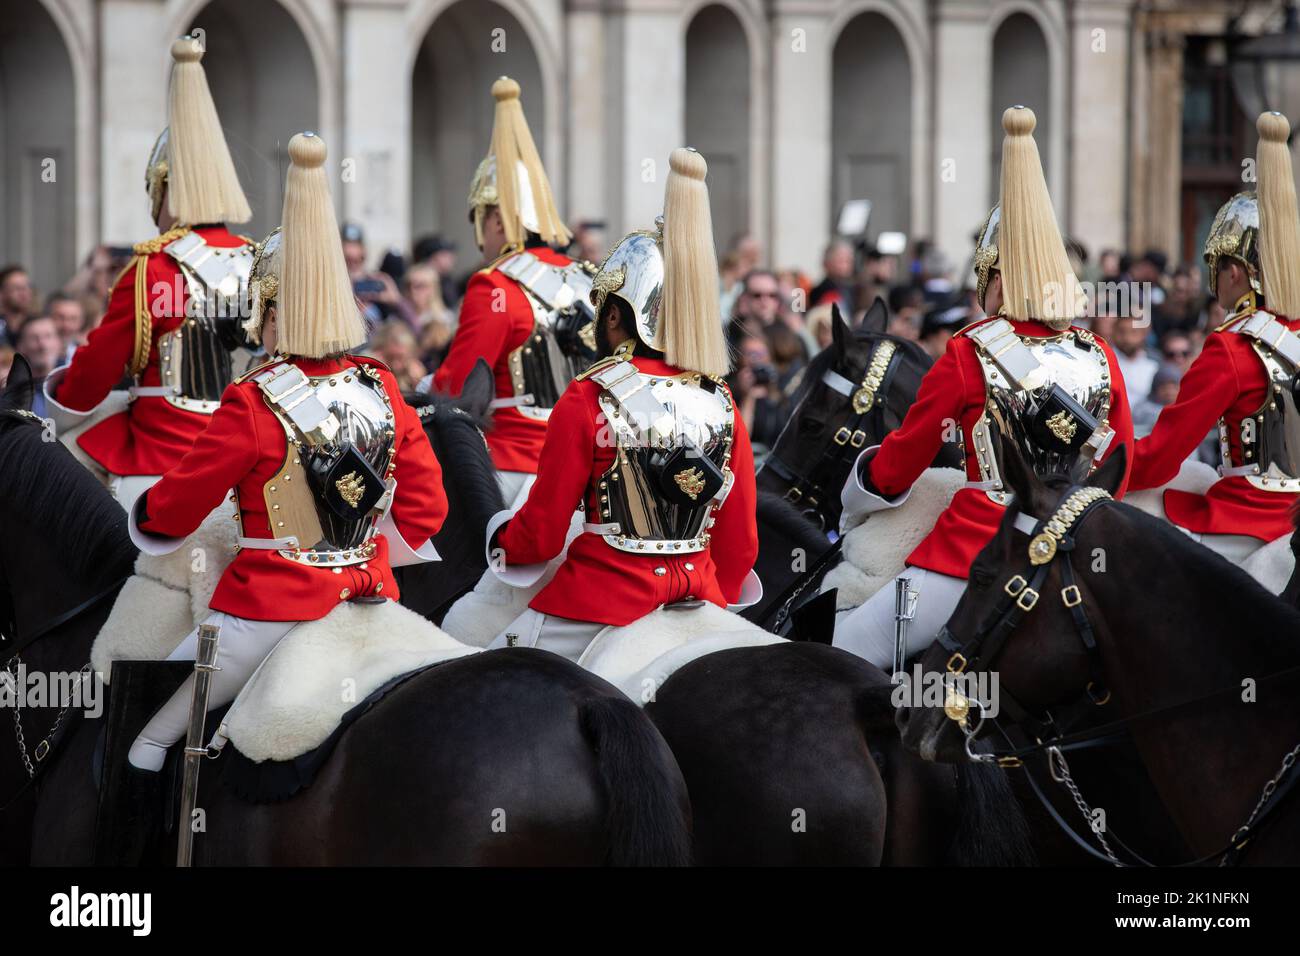 London, England. 19th September, 2022. The Royal Regiment of Horse Guards takes oart in the procession following the State Funeral of Queen Elizabeth II held in London and Windsor  today. It was one of the biggest events the country has ever seen. Credit: Kiki Streitberger / Alamy Live News Stock Photo